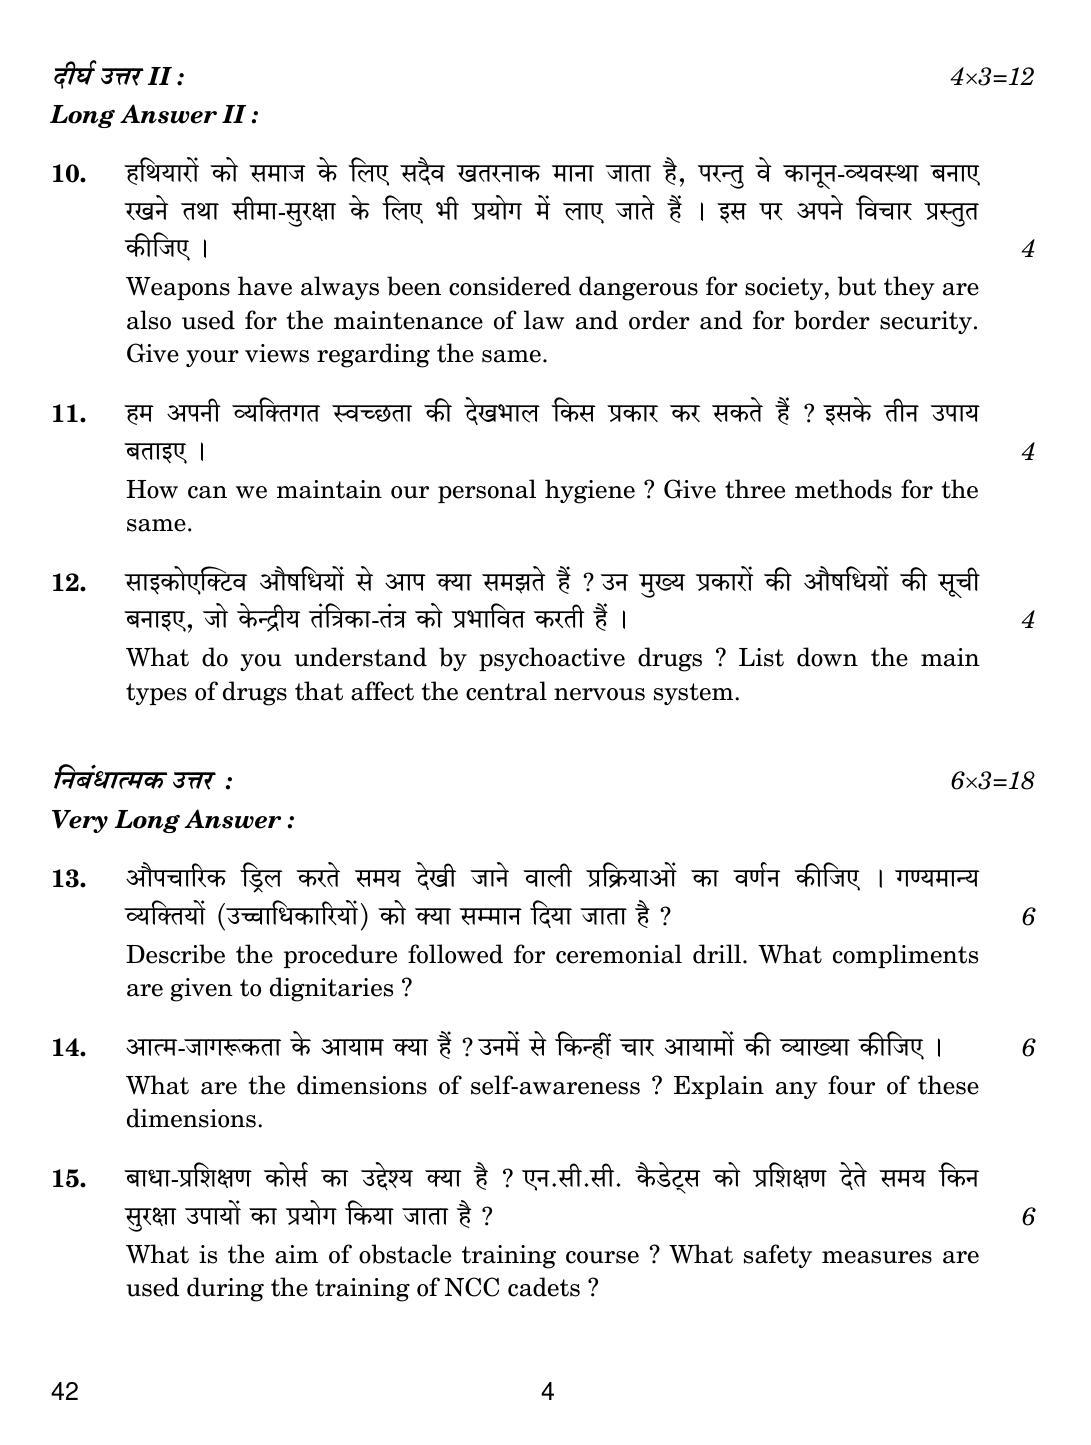 CBSE Class 12 42 National Cadet Corps (NCC) 2019 Question Paper - Page 4